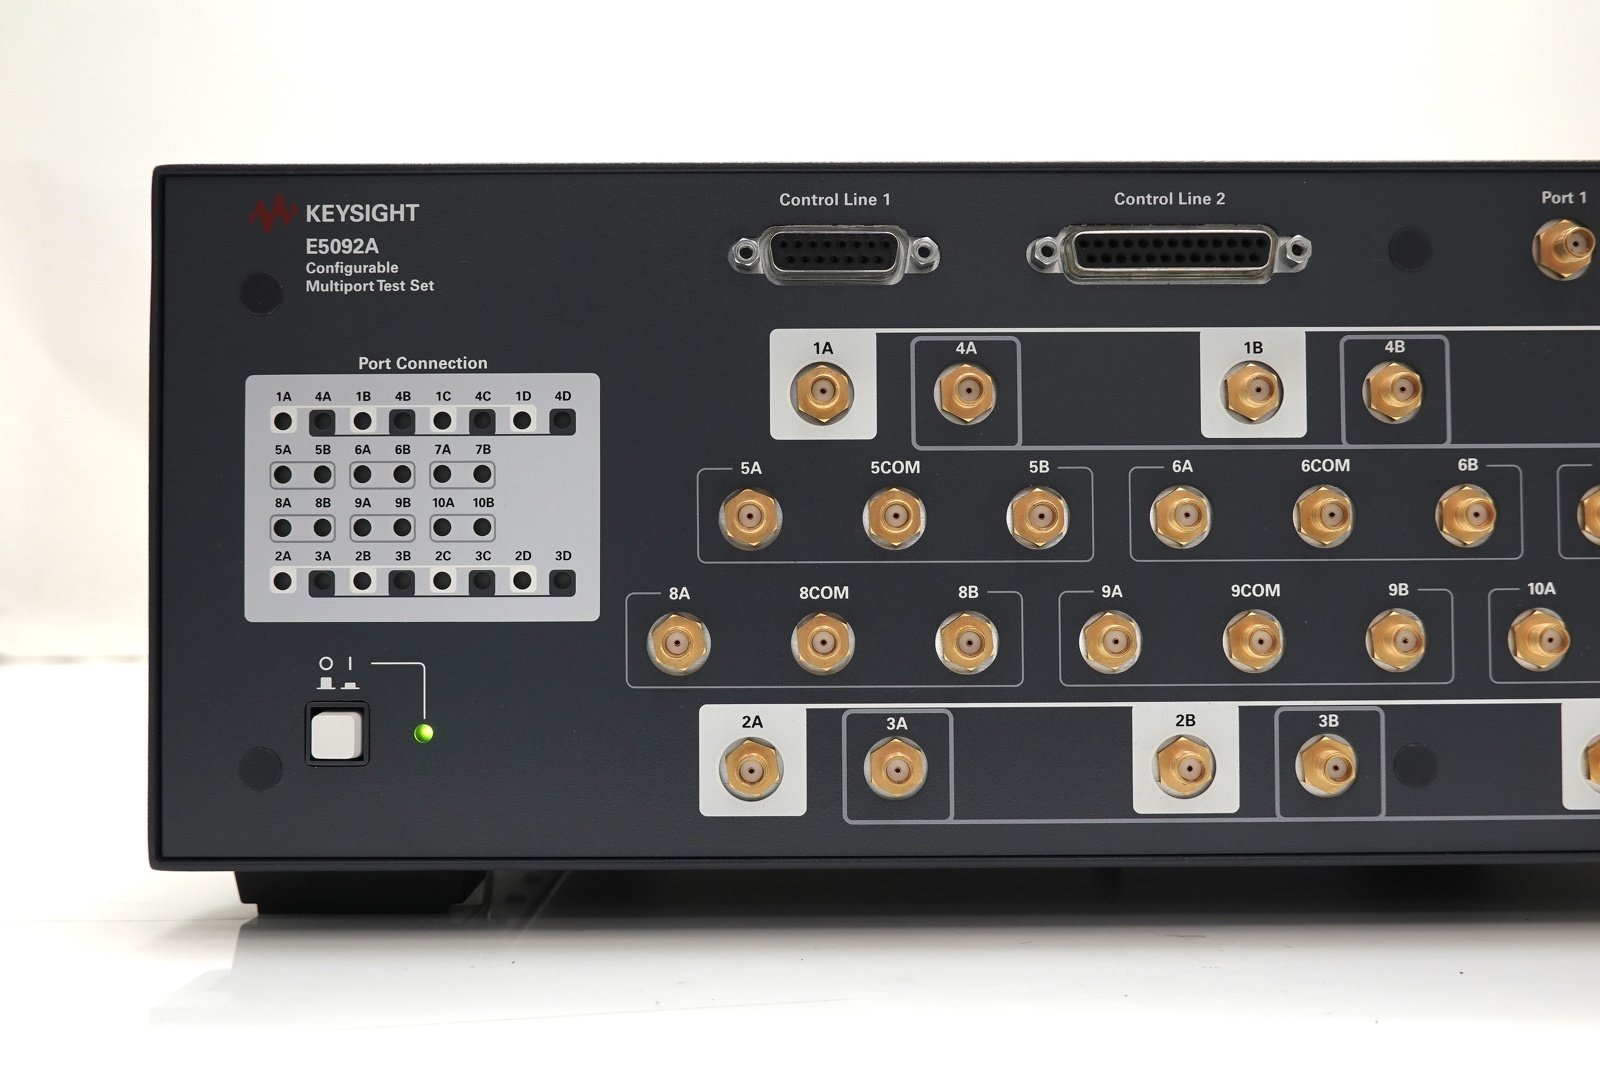 Keysight E5092A-020 20 GHz Switching Test Set / up to 22-port Extension / up to 10 Full Crossbar Capability